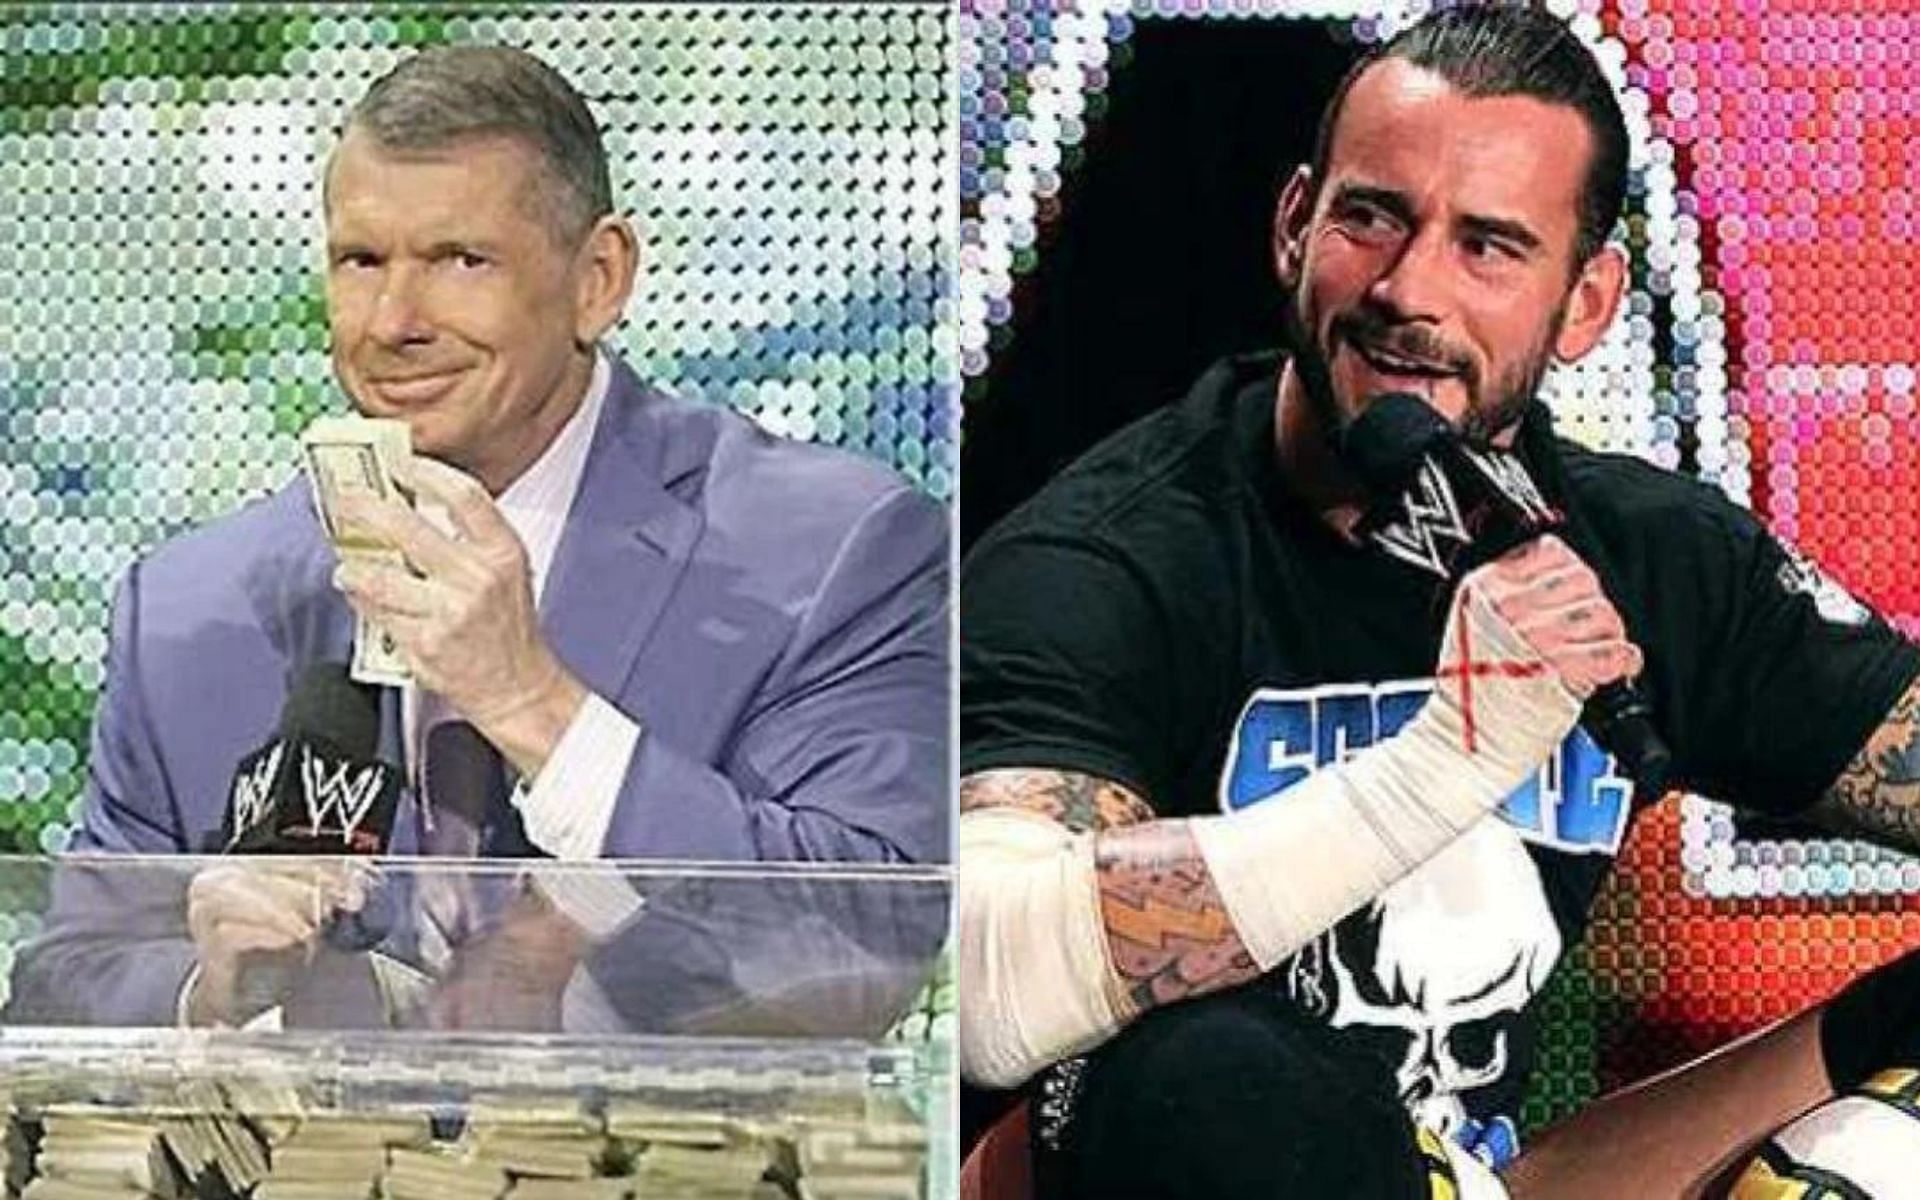 CM Punk called out the McMahon family in his scathing promo in 2011